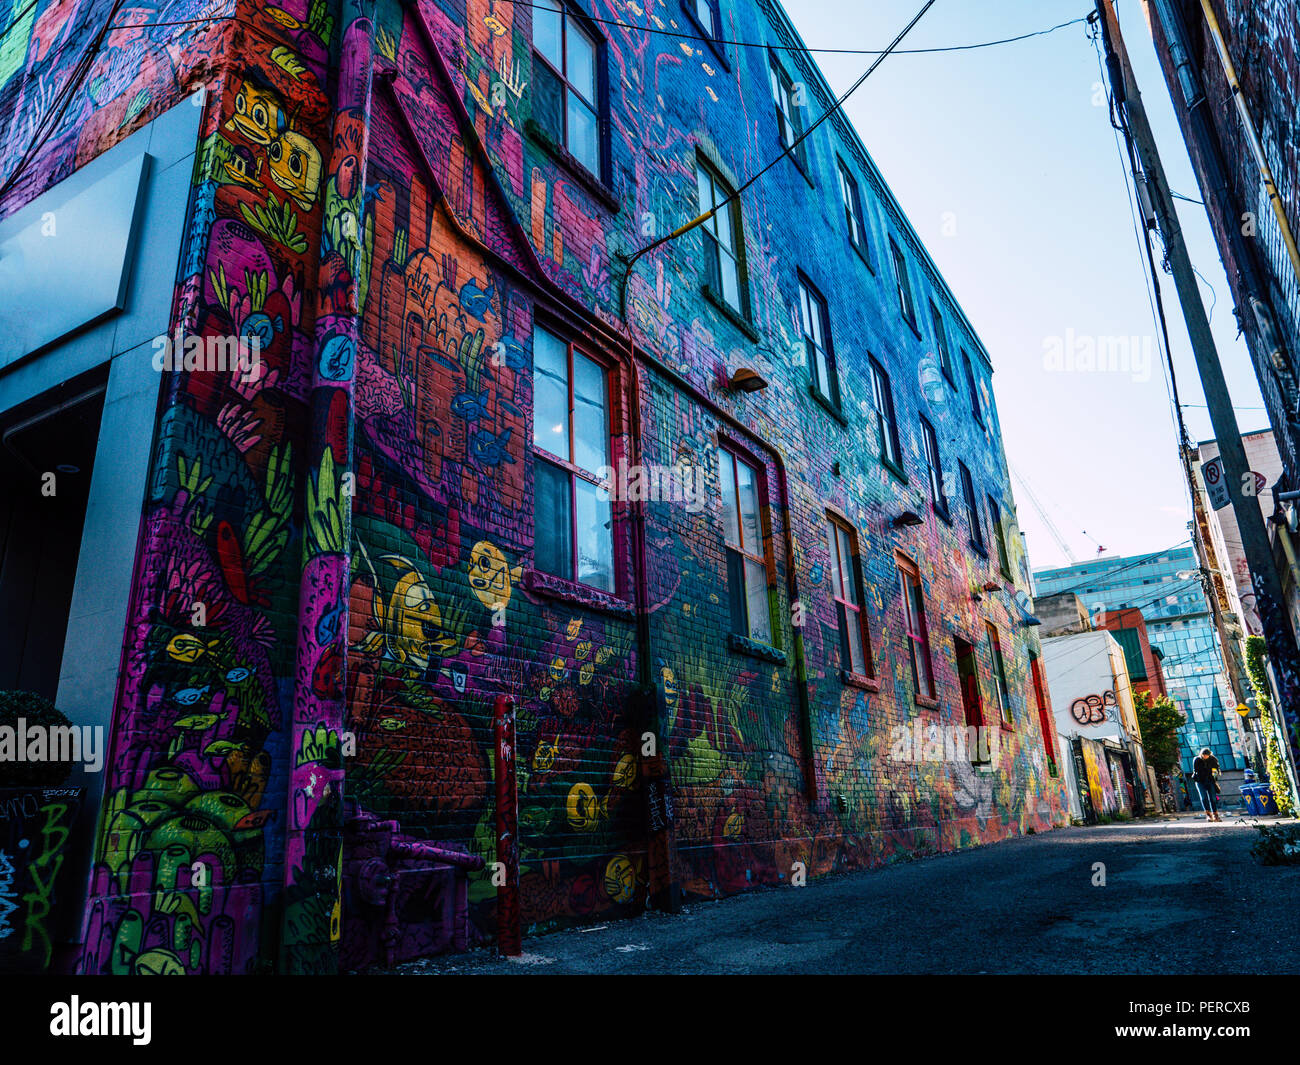 amazing street art in a graffiti alley colorful arts on building, fashion district toronto Stock Photo